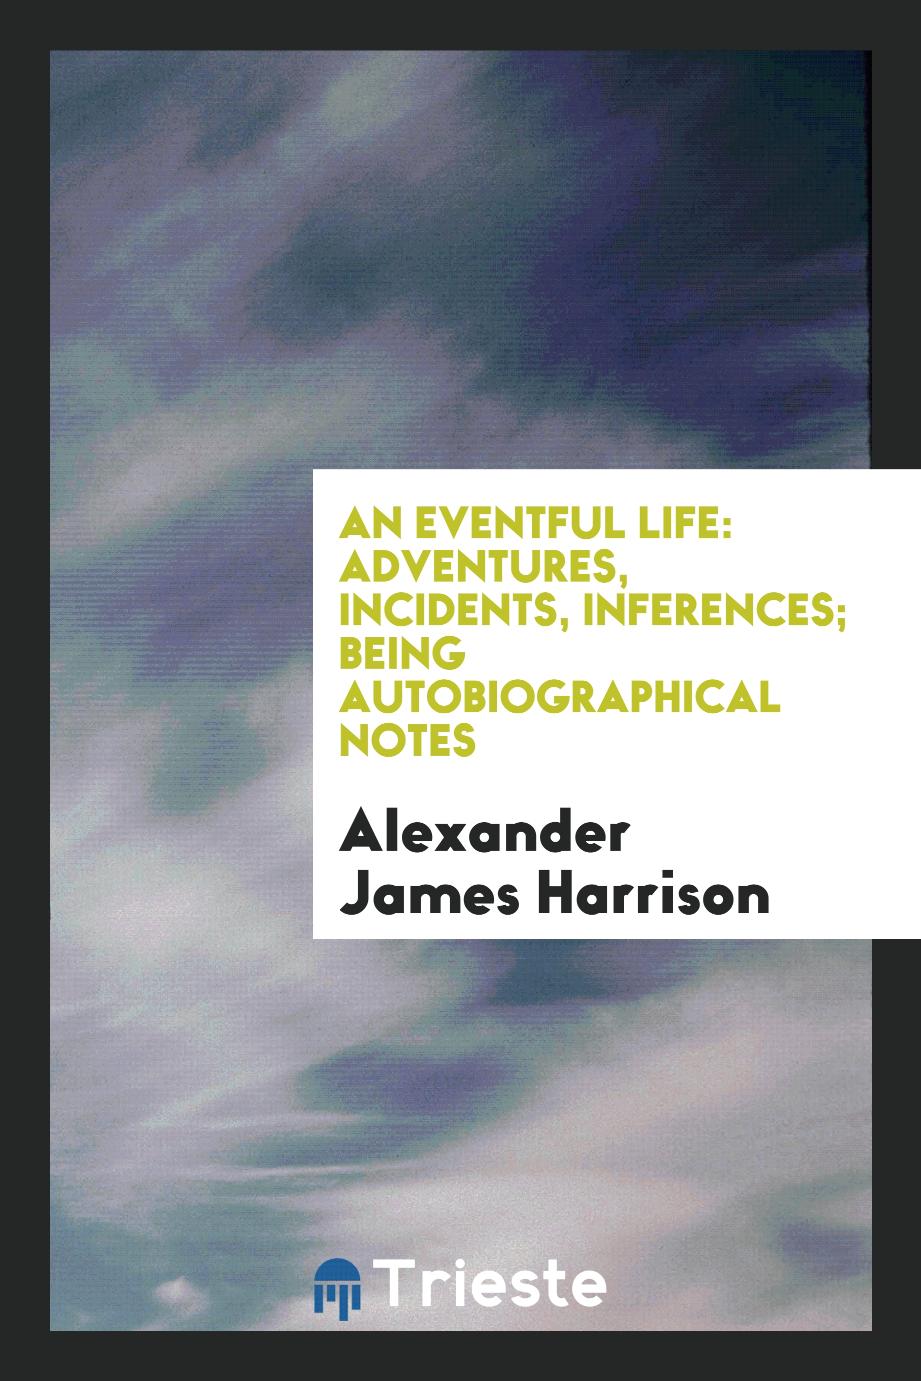 An eventful life: adventures, incidents, inferences; being autobiographical notes